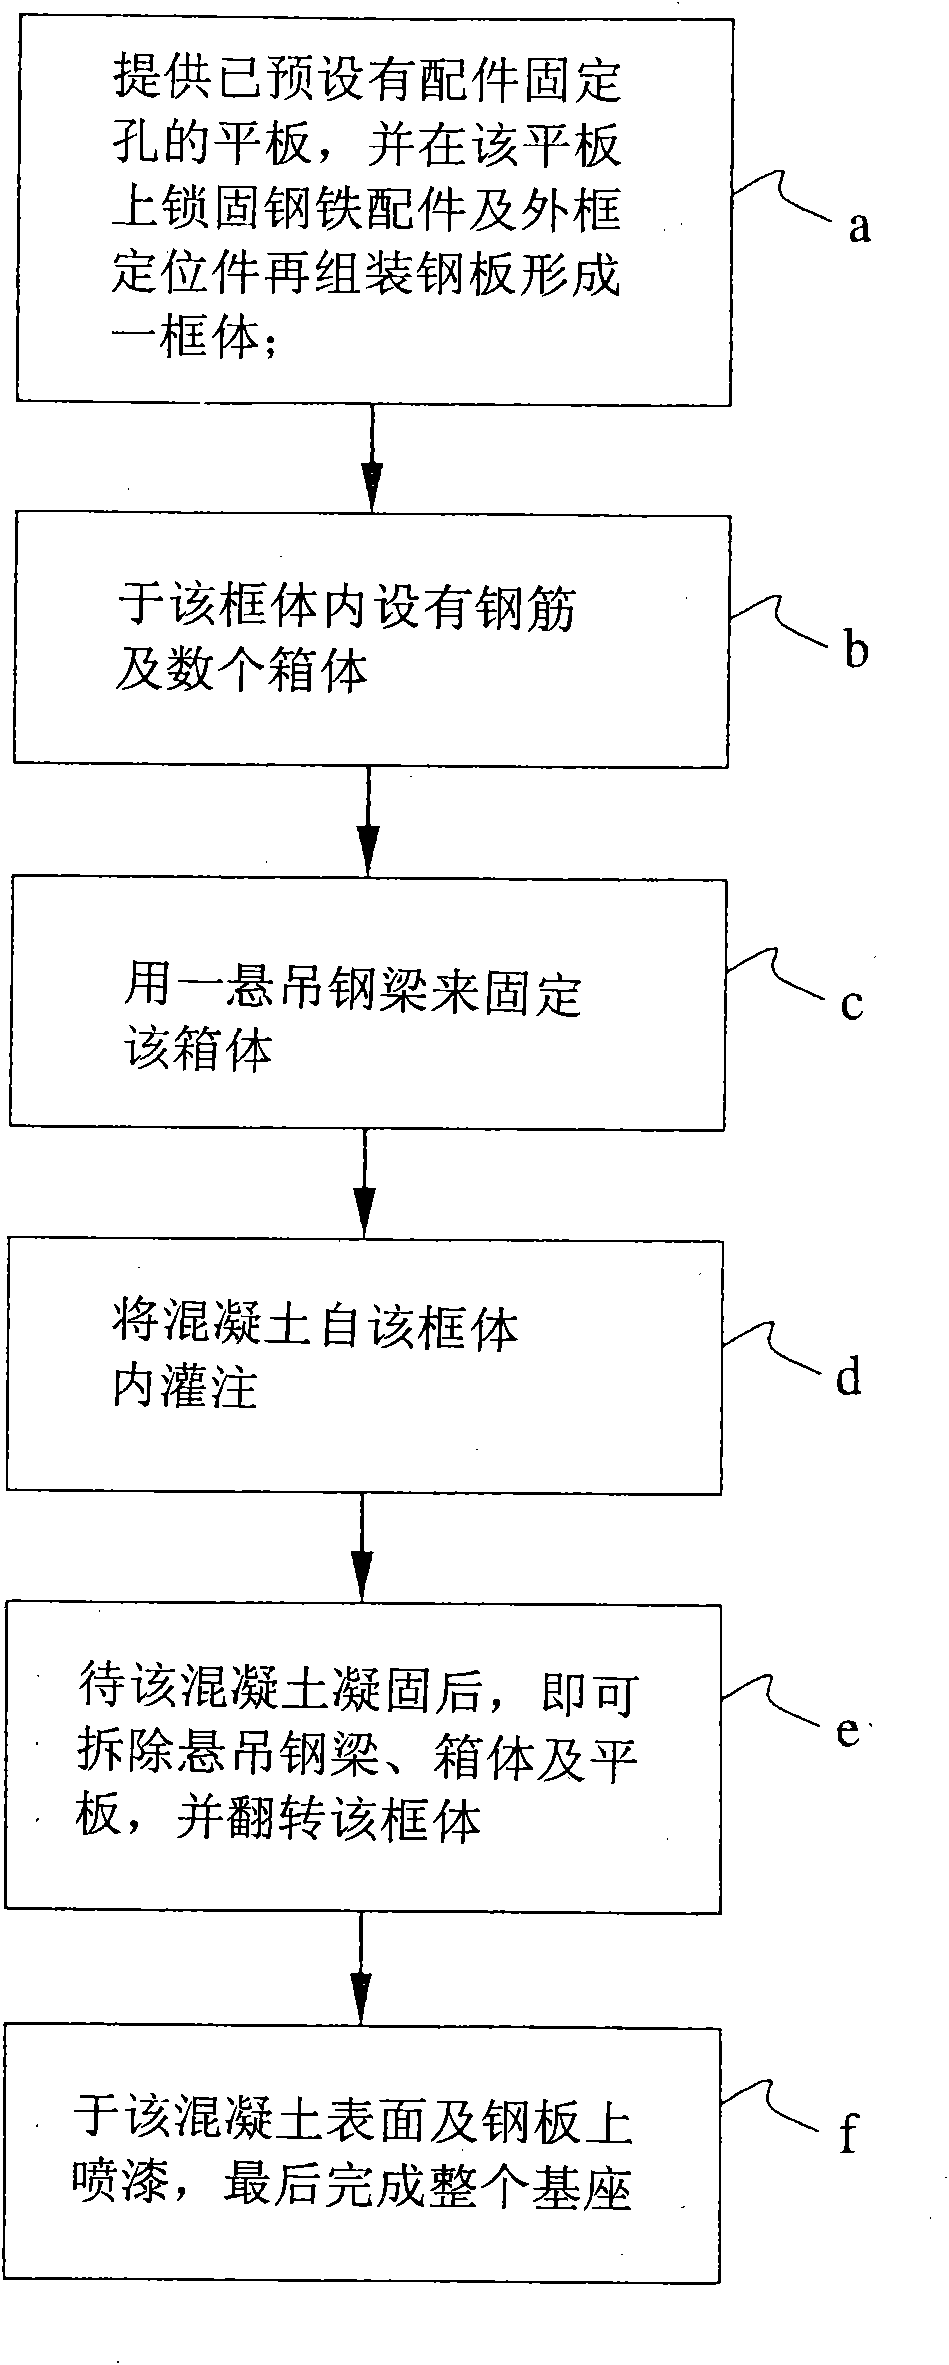 Substrate manufacturing method